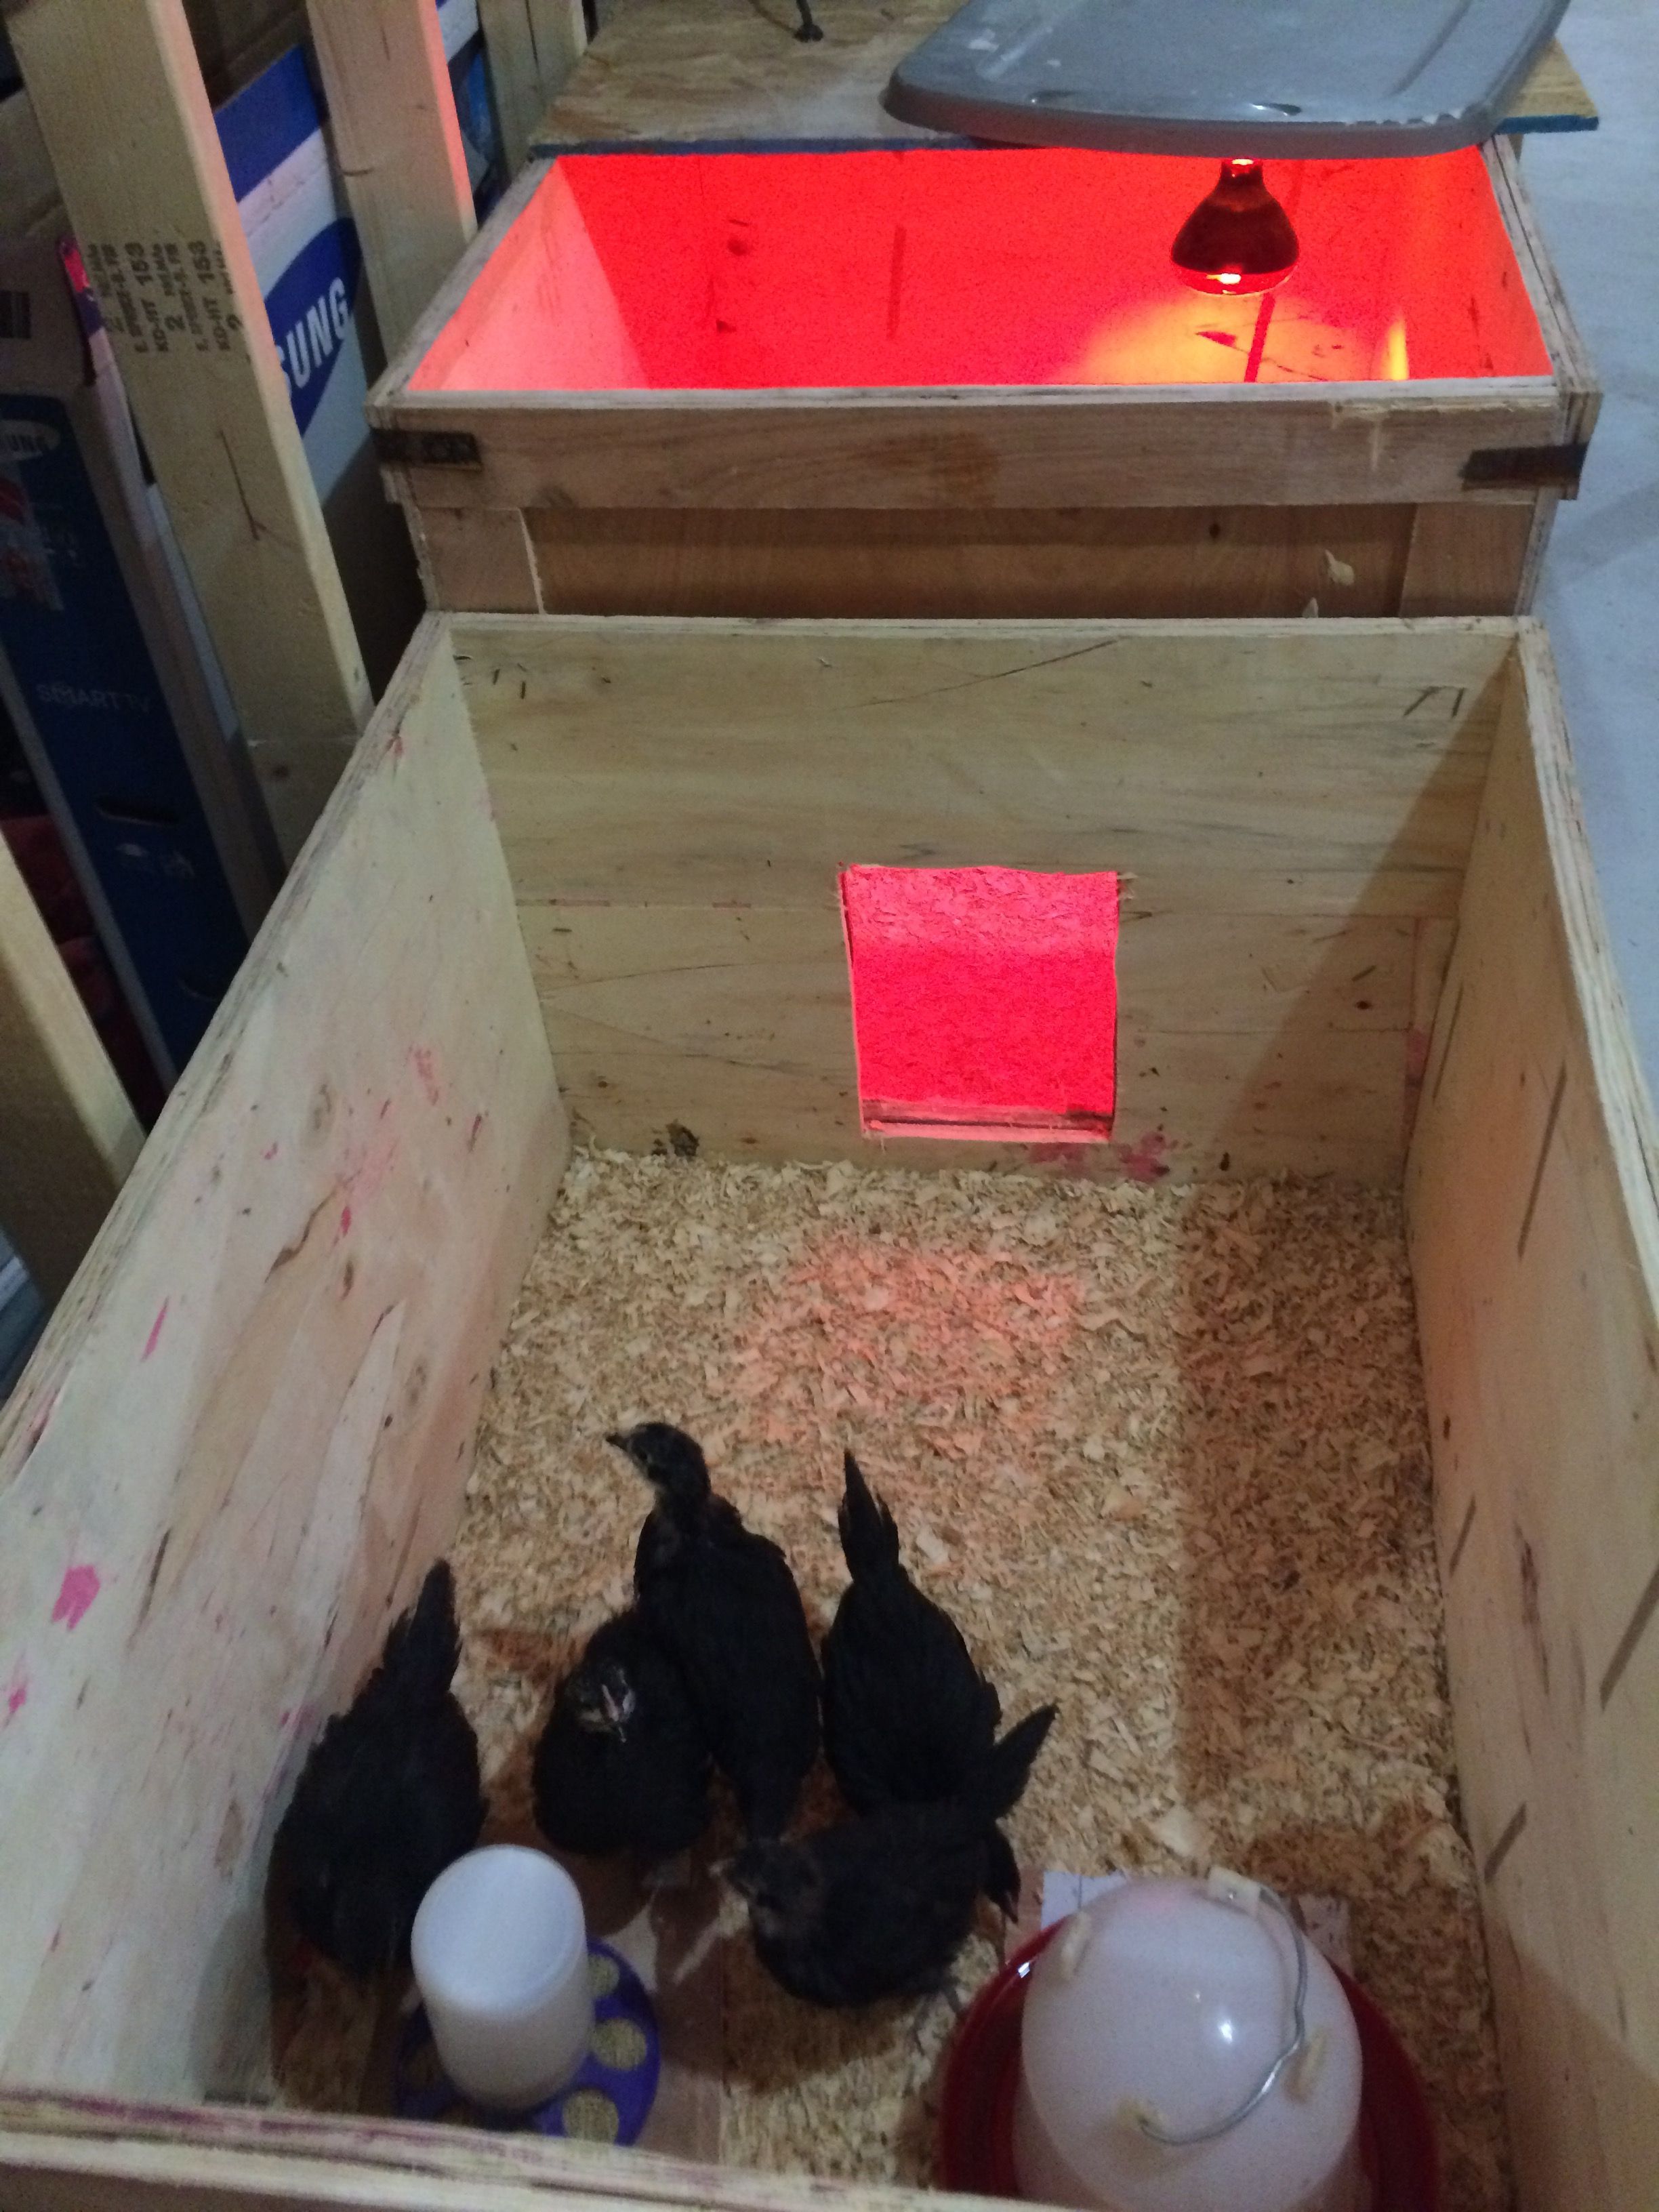 The chicks new expanded brooder... first time doing chicks over winter. I want to keep them in as long as possible